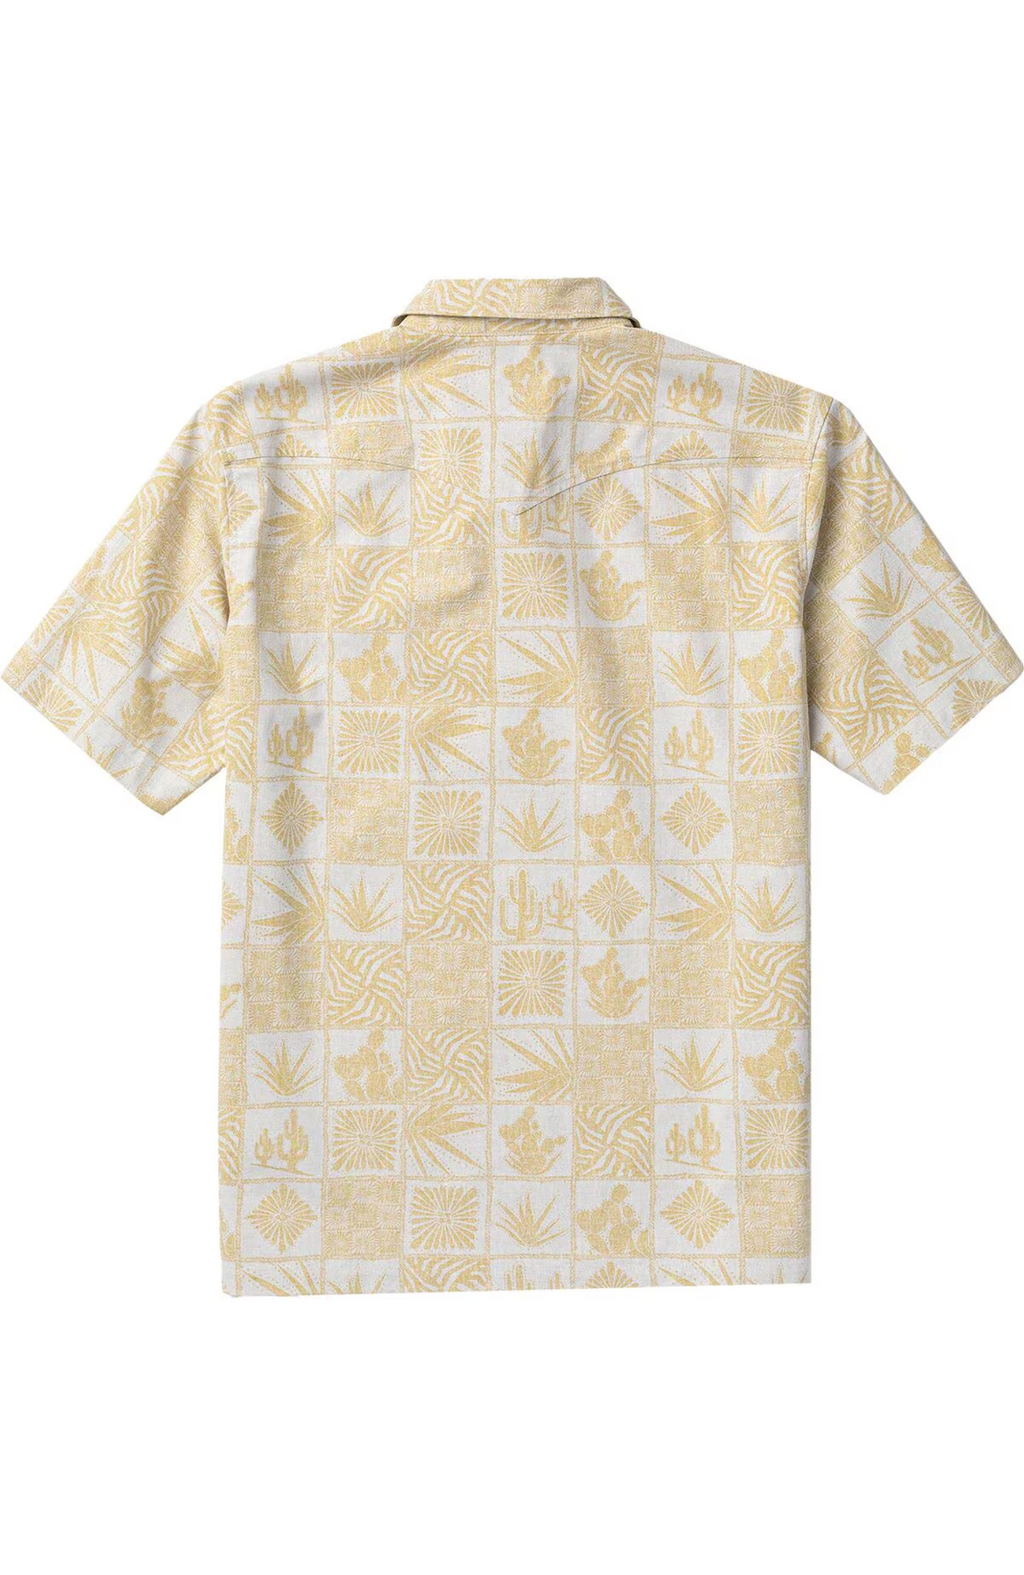 Seager - Schooner 3/4 Button Up